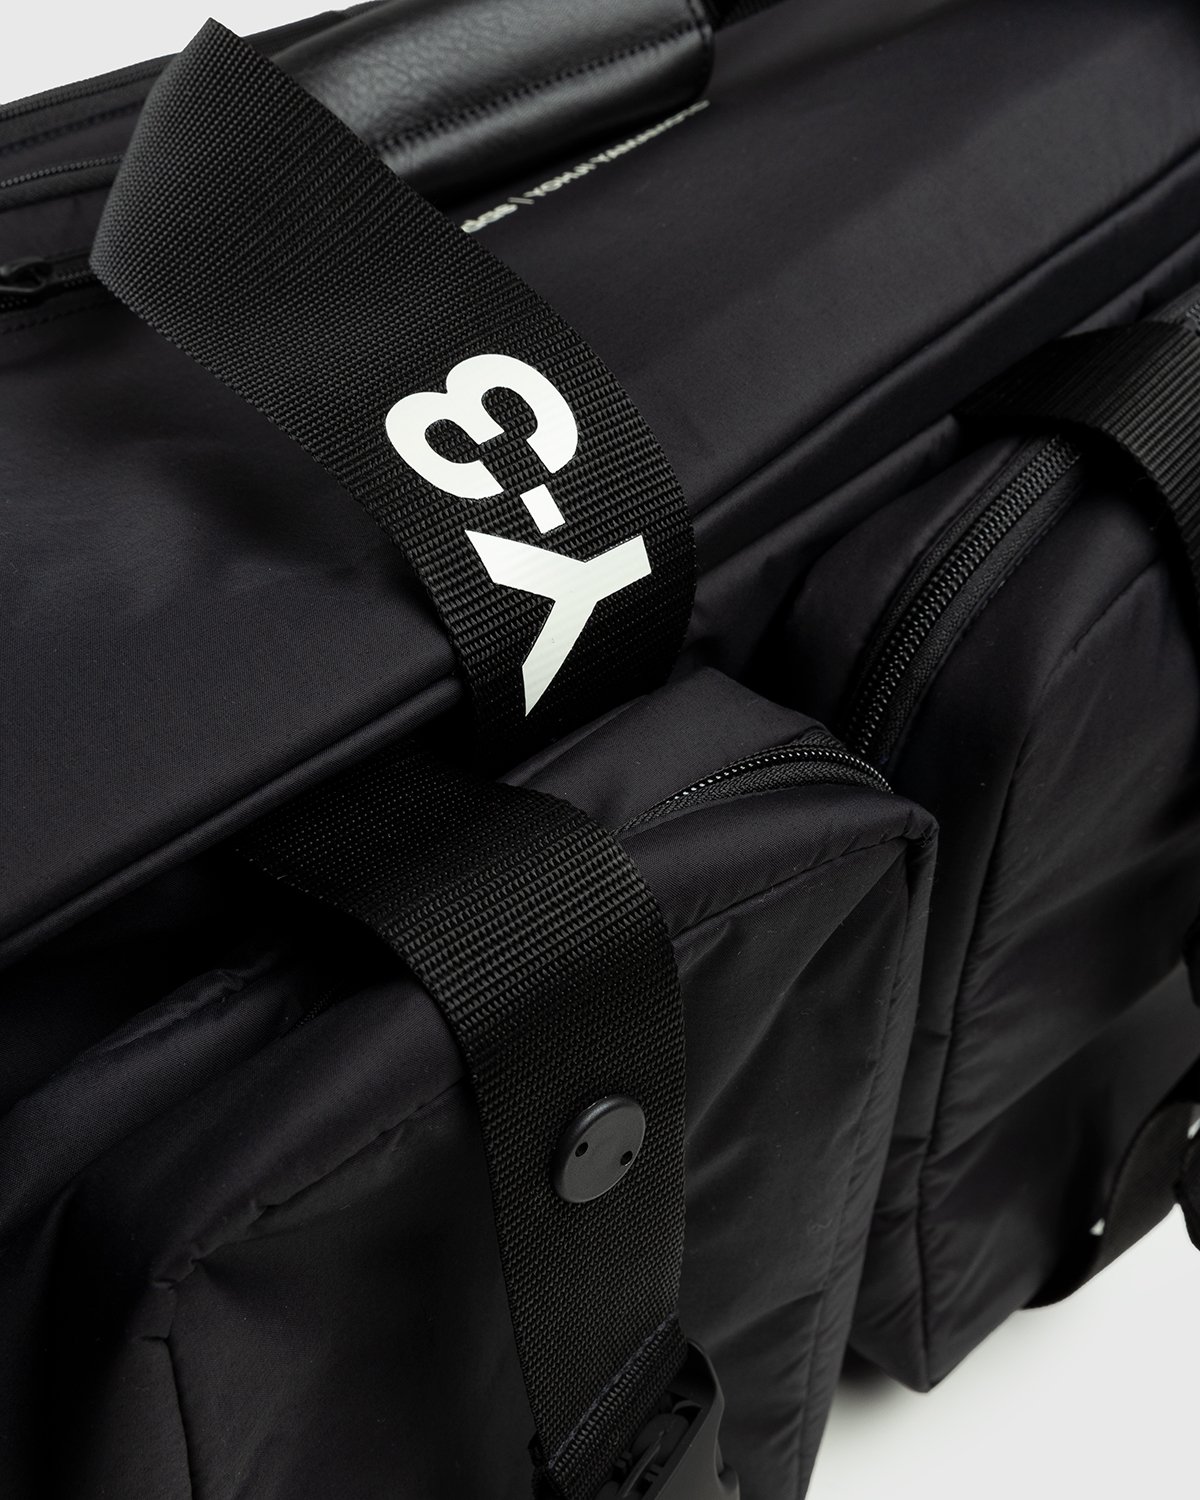 Y-3 - Mobile Archive Hold-All Duffle Bag Black - Accessories - Black - Image 7